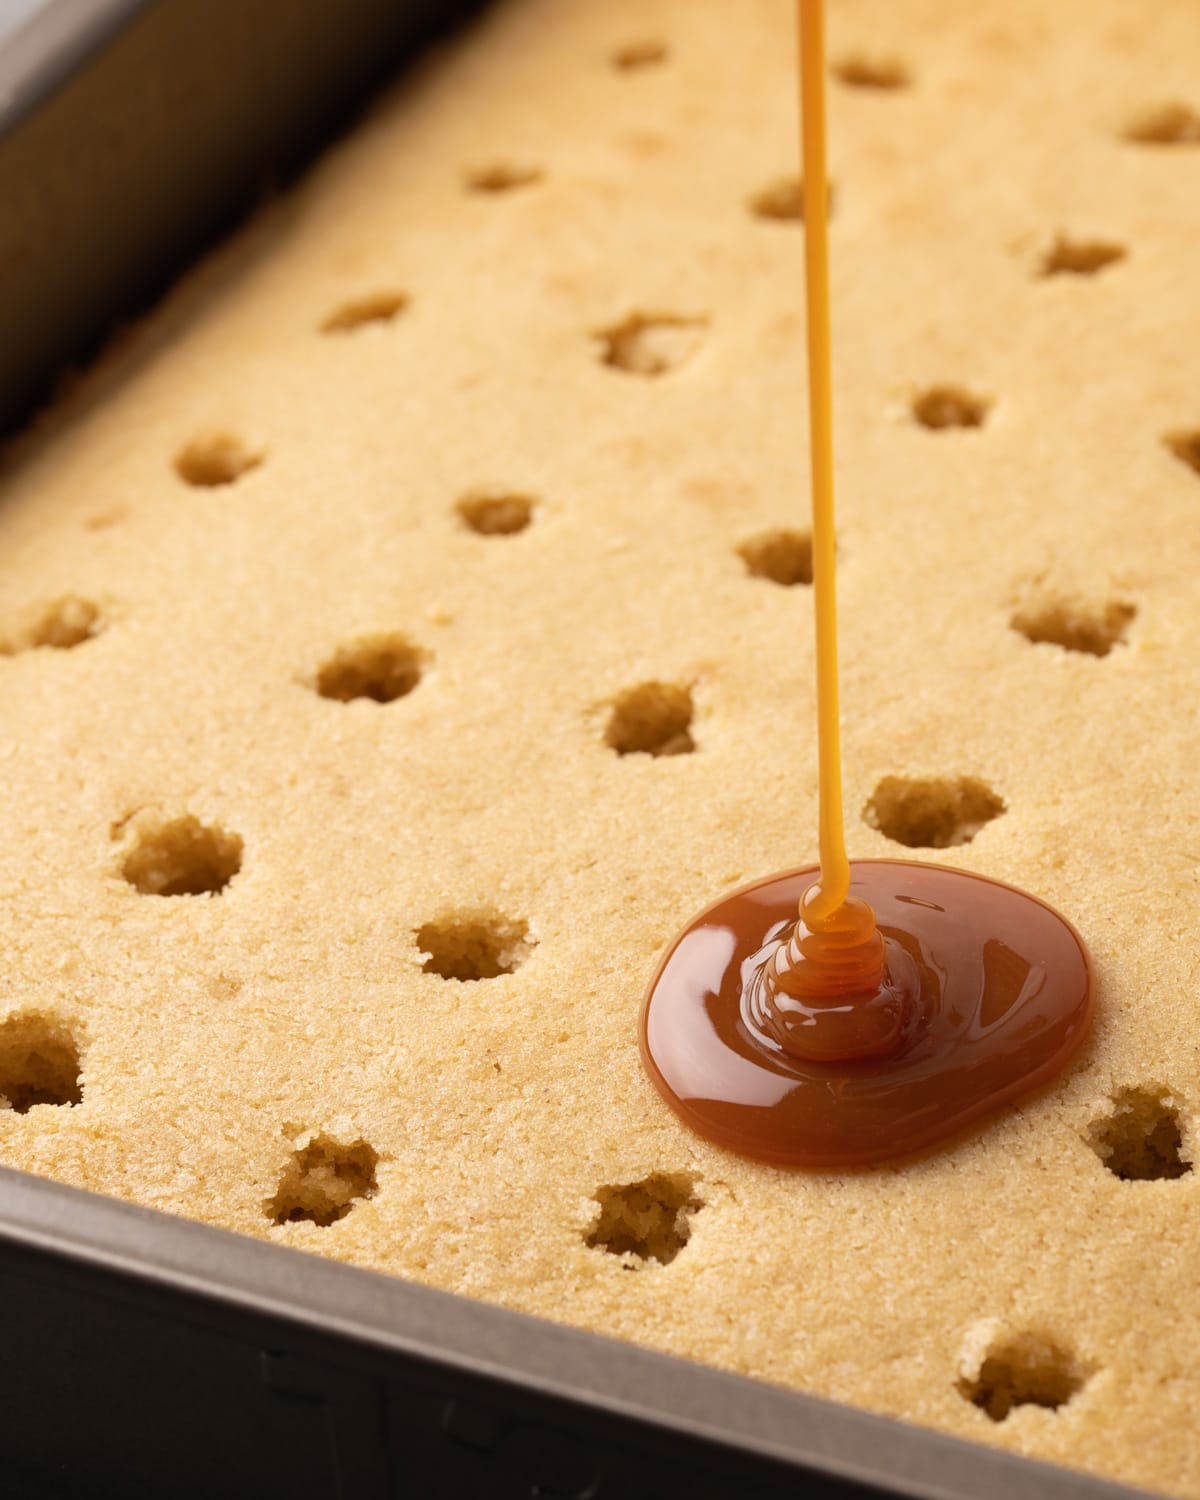 A stream of caramel is drizzled onto a vanilla cake filled with holes.